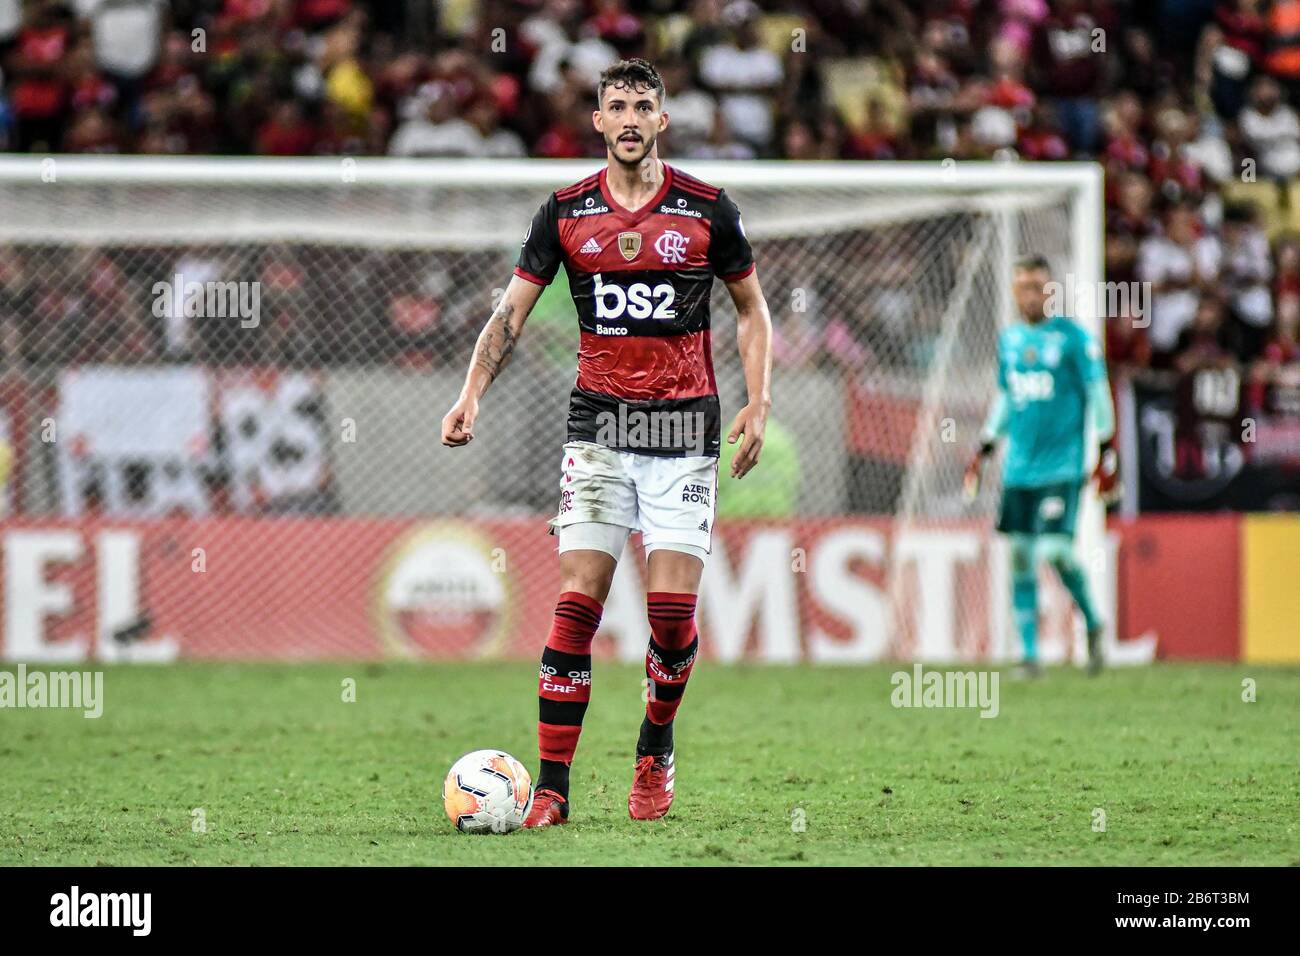 Gustavo Henrique of Brazil's Flamengo, top, heads the ball as